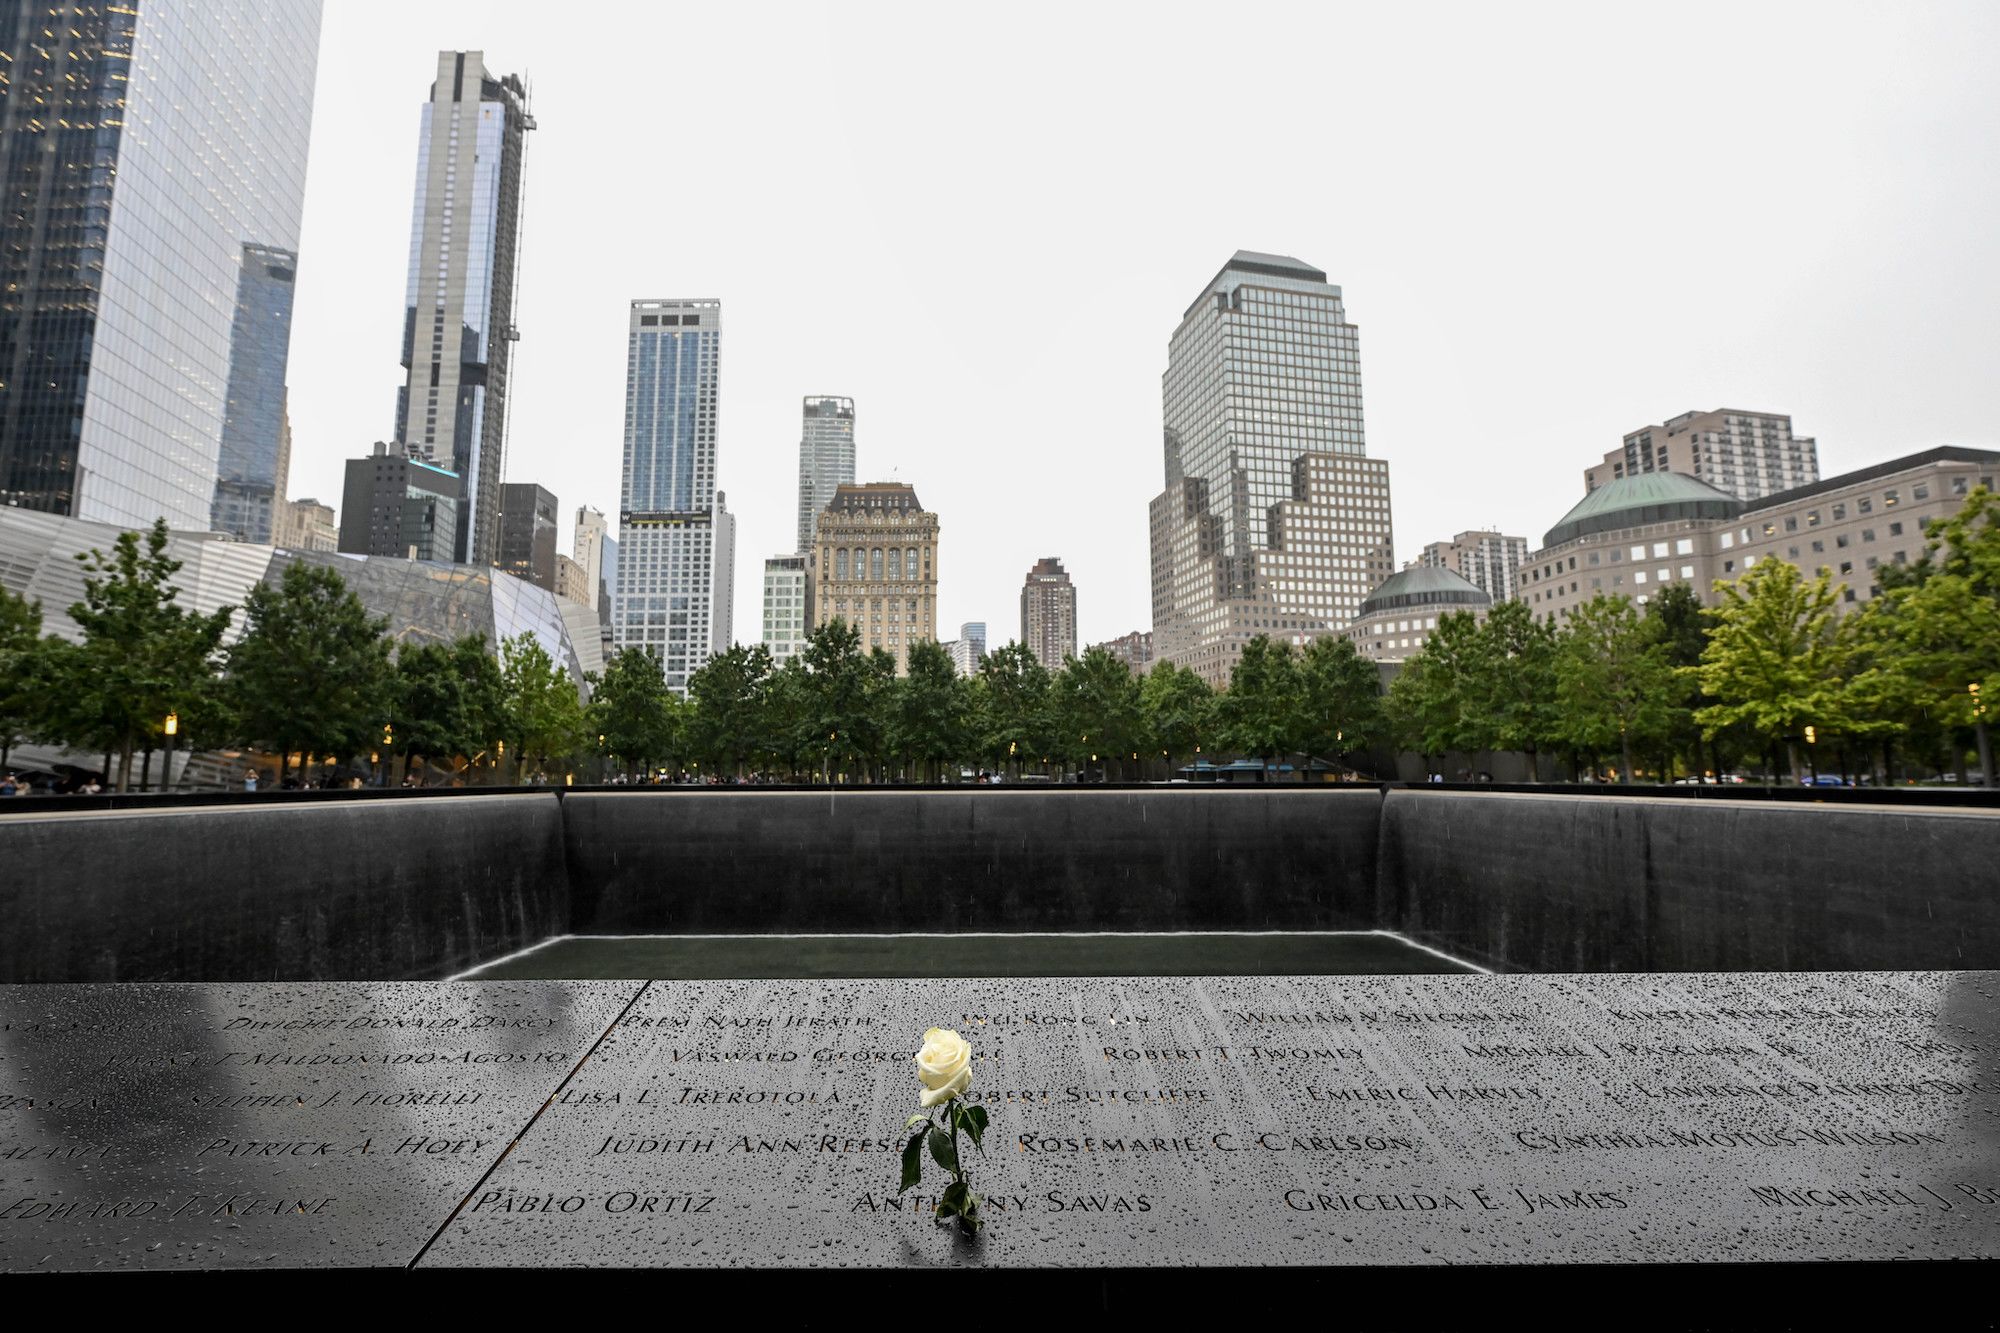 The Week That Was: Remembering 9/11 - 20 Years Later - NY Sports Day